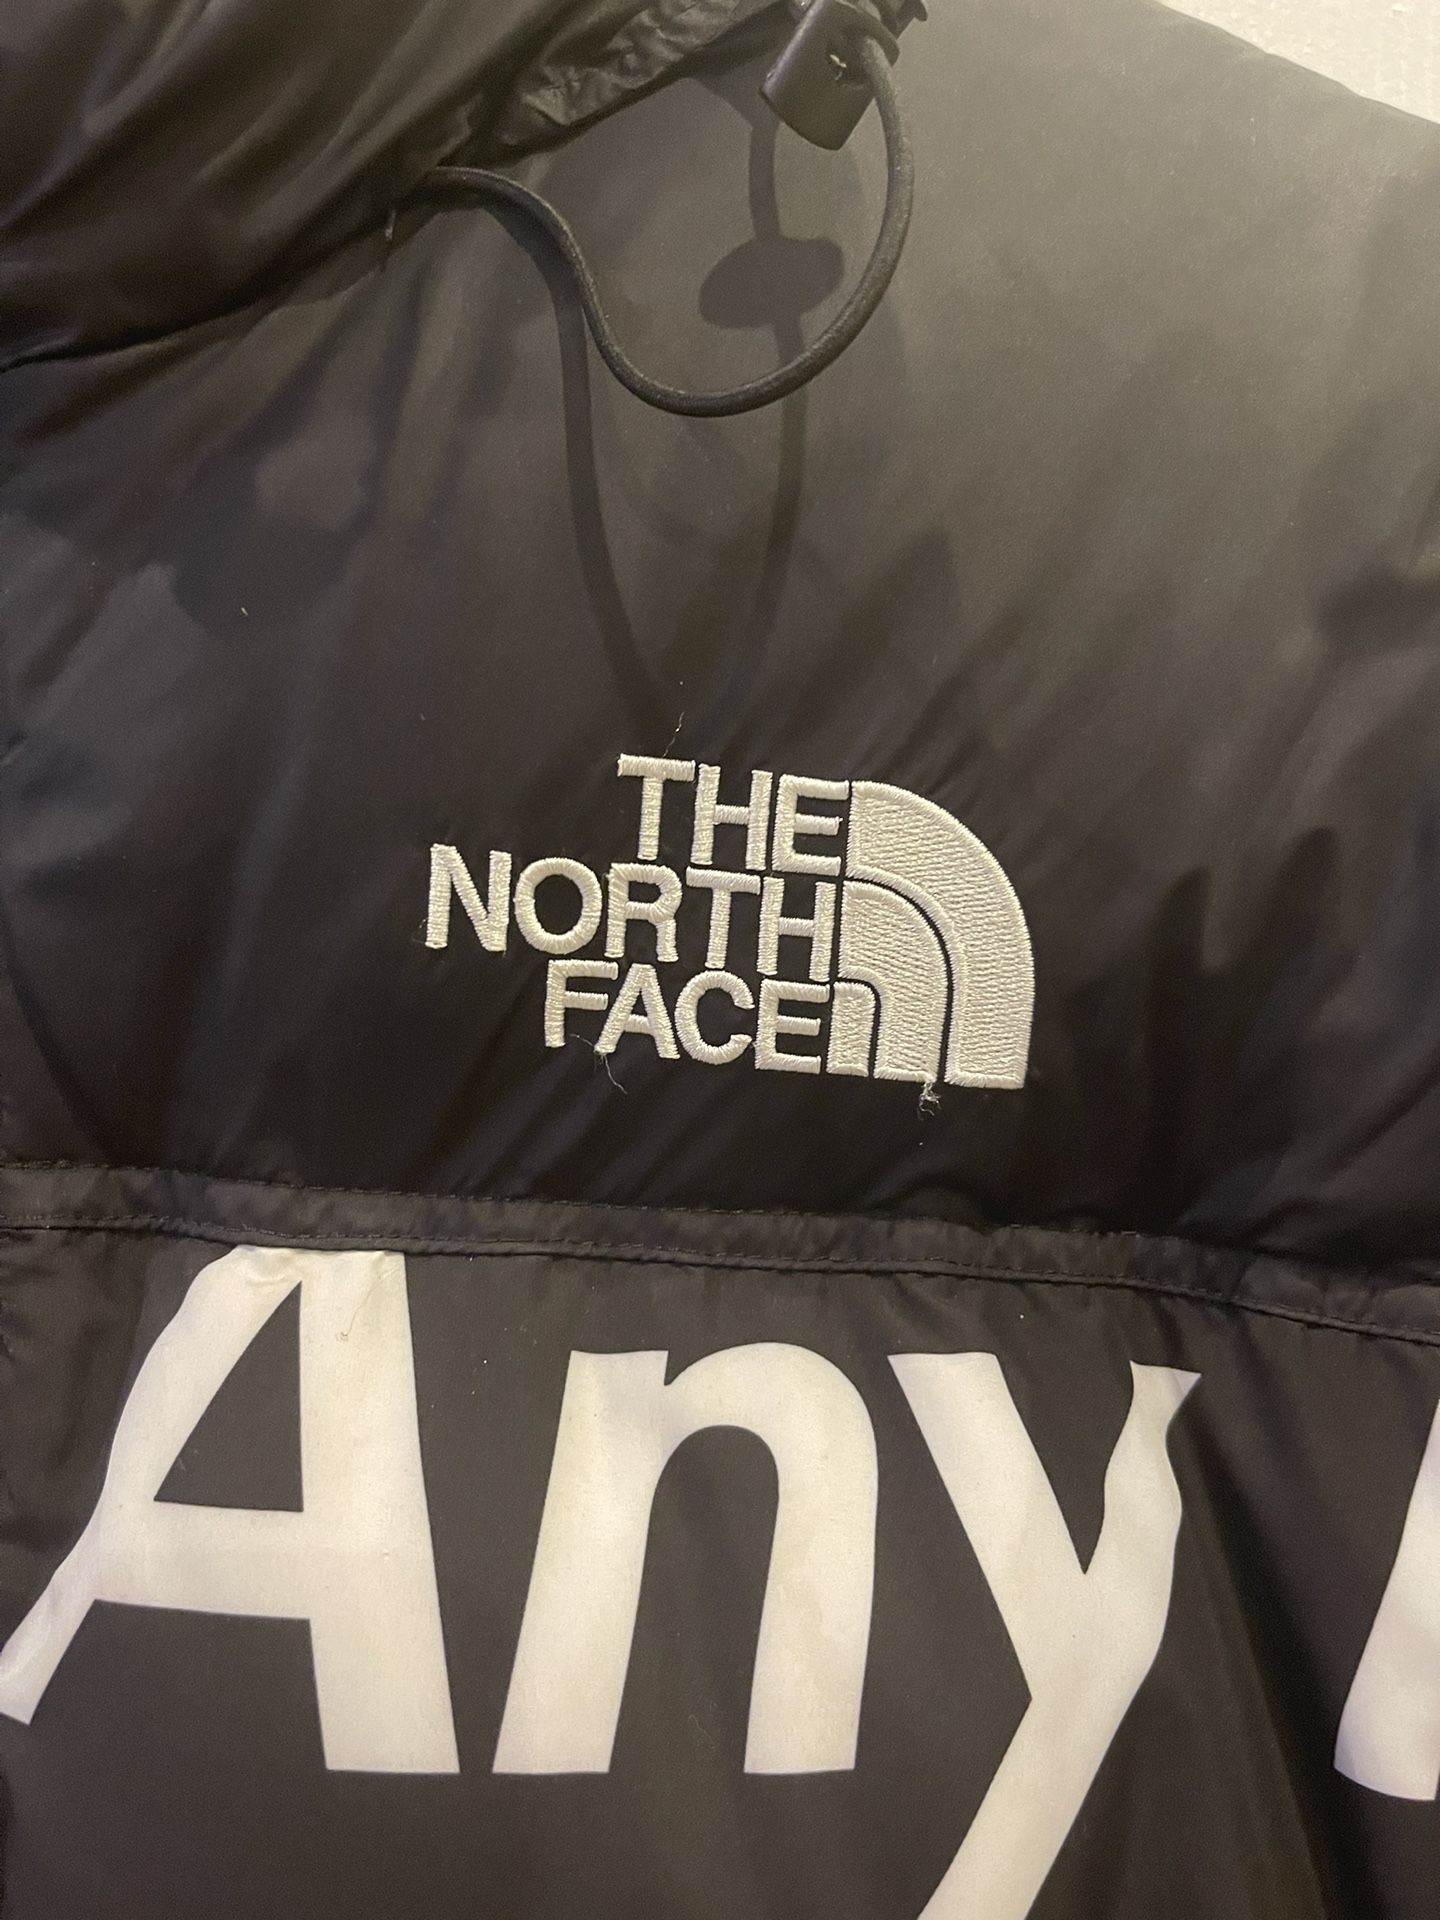 north face supreme jacket by any means necessary, Off 61%, www